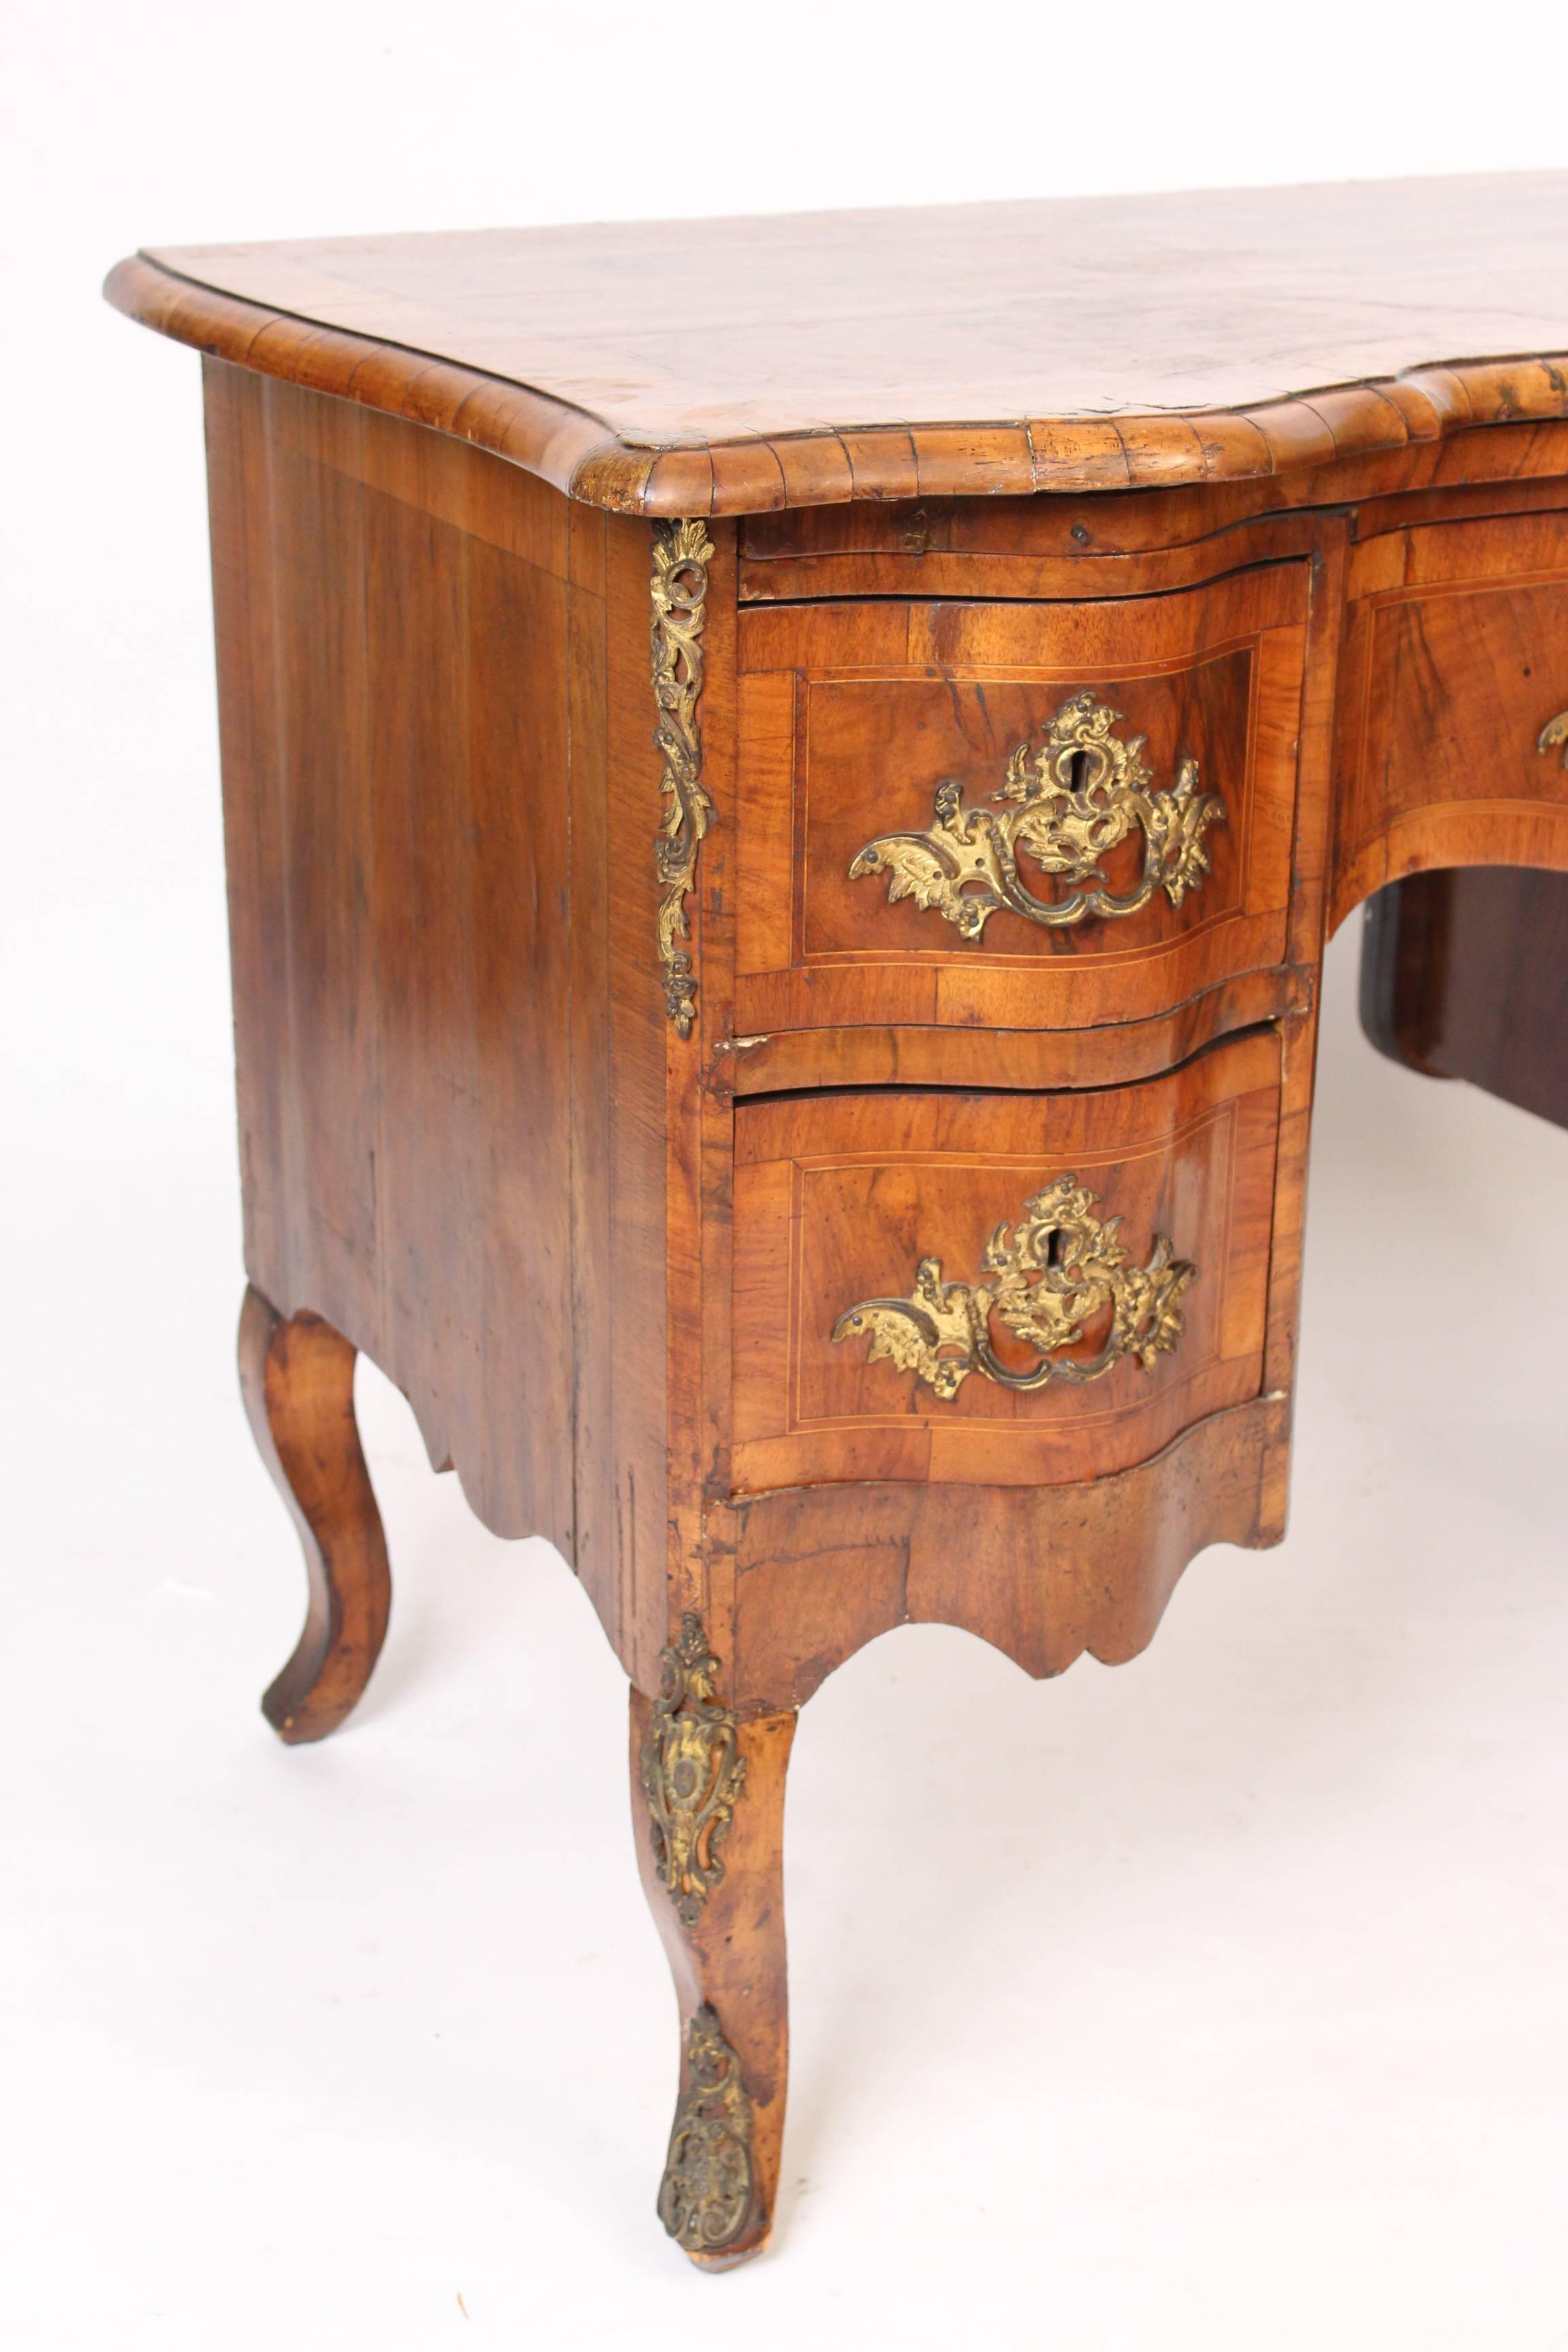 Louis XV style burl walnut knee hole desk with gilt metal mounts, circa 1900. Back side is finished so that it can float in the center of a room.